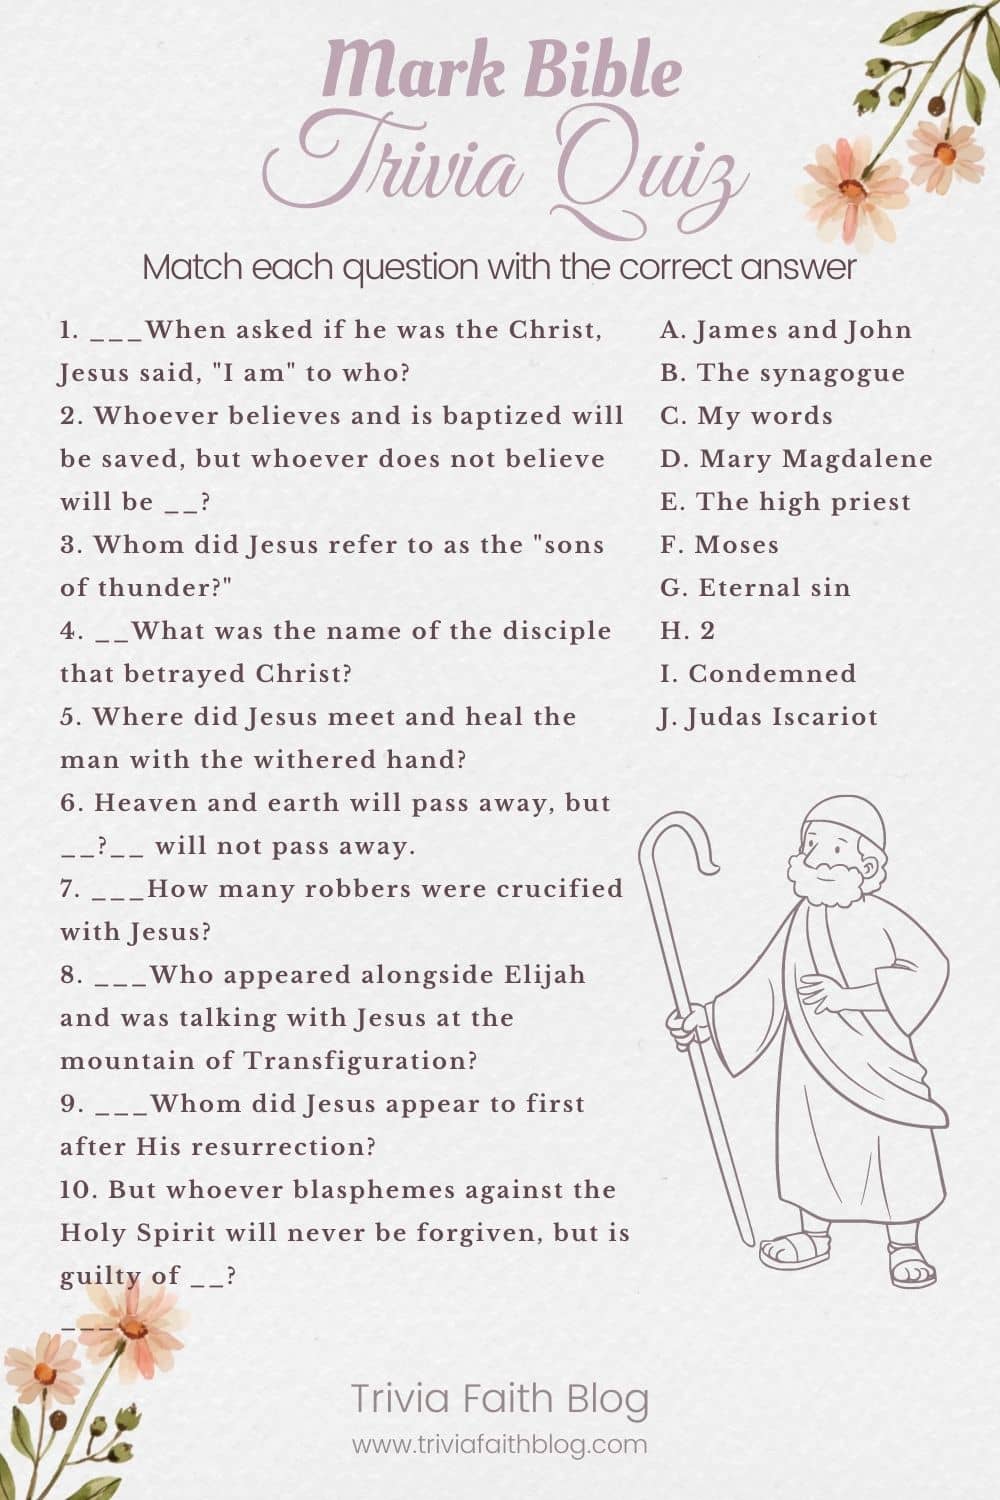 Mark Bible Trivia Questions and Answers (with Verses)